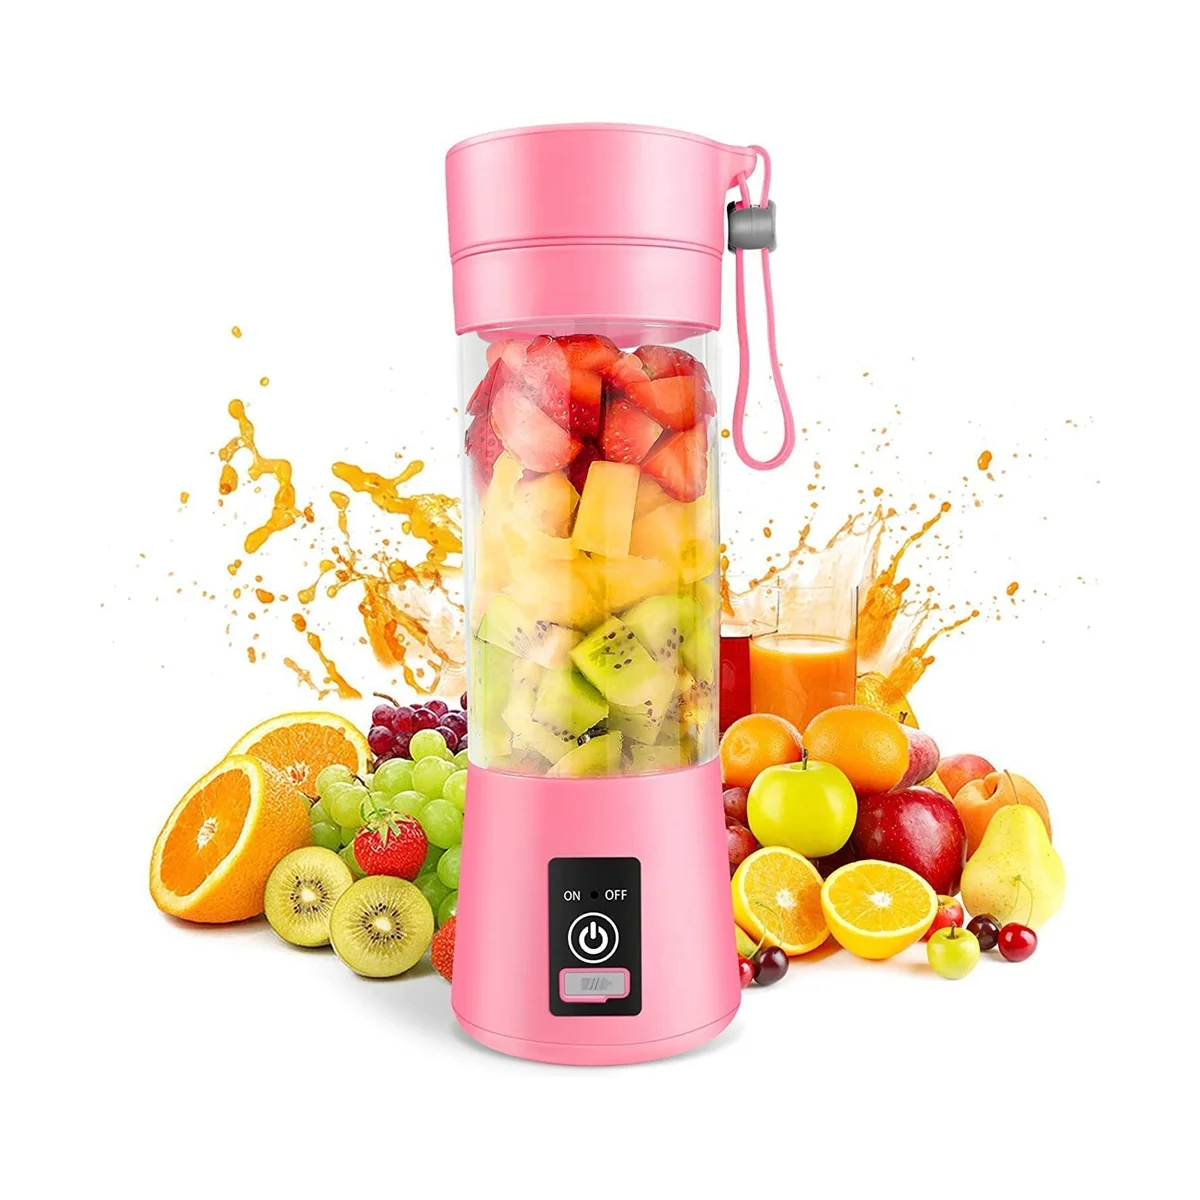 https://ae01.alicdn.com/kf/Sa5e7d1d3416e436e89e04fdd451bc3eb2/Portable-Blender-Mini-Blender-for-Shakes-and-Smoothies-Rechargeable-USB-380Ml-Traveling-Fruit-Juicer-Cup-with.jpg